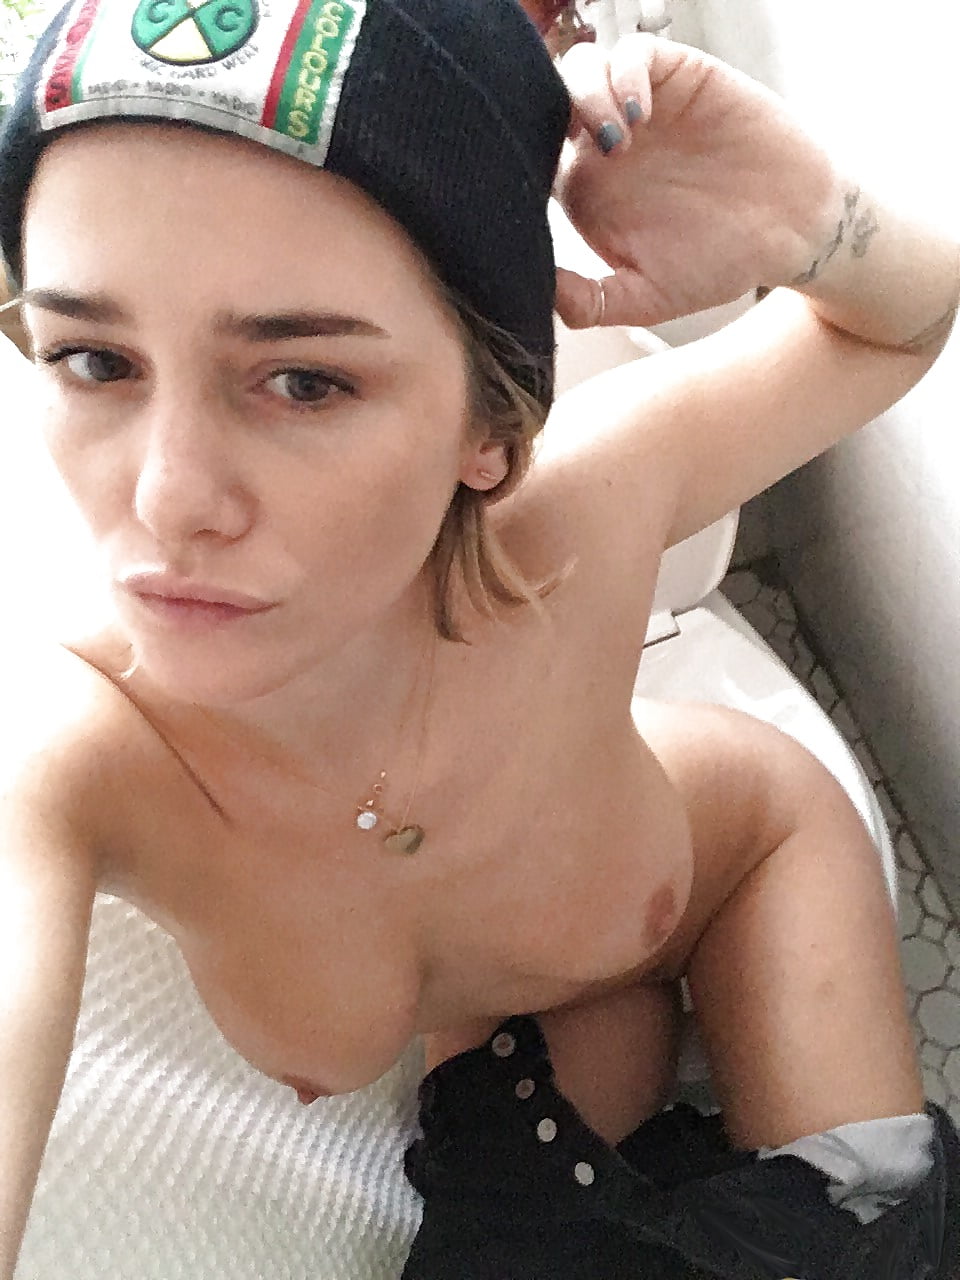 ADDISON_TIMLIN__NUDE_PHOTOS___DOGGY_STYLE_SEX_TAPE_LEAKED (5/13)